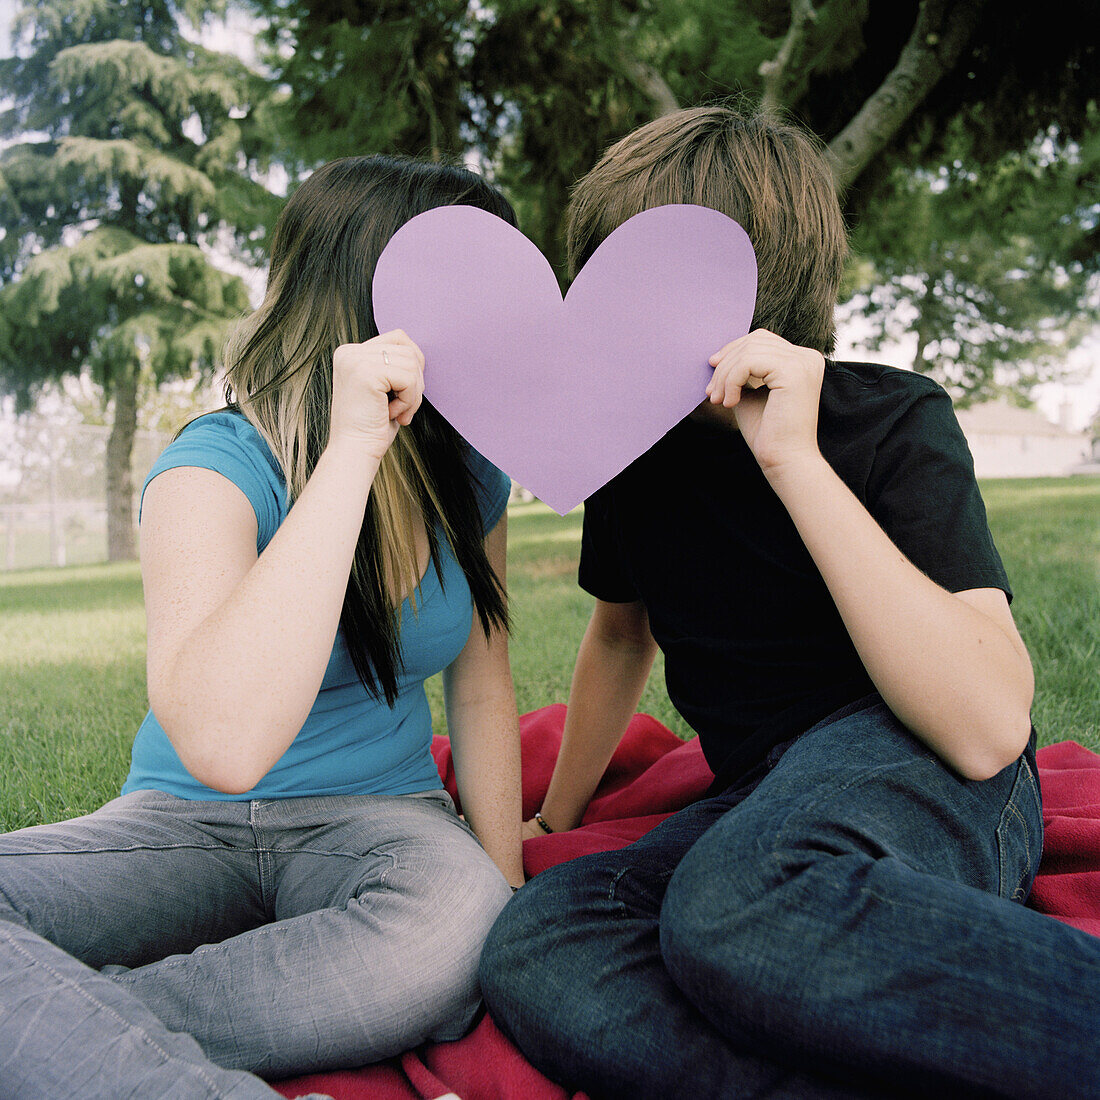 A teenage couple hiding behind a cut out heart